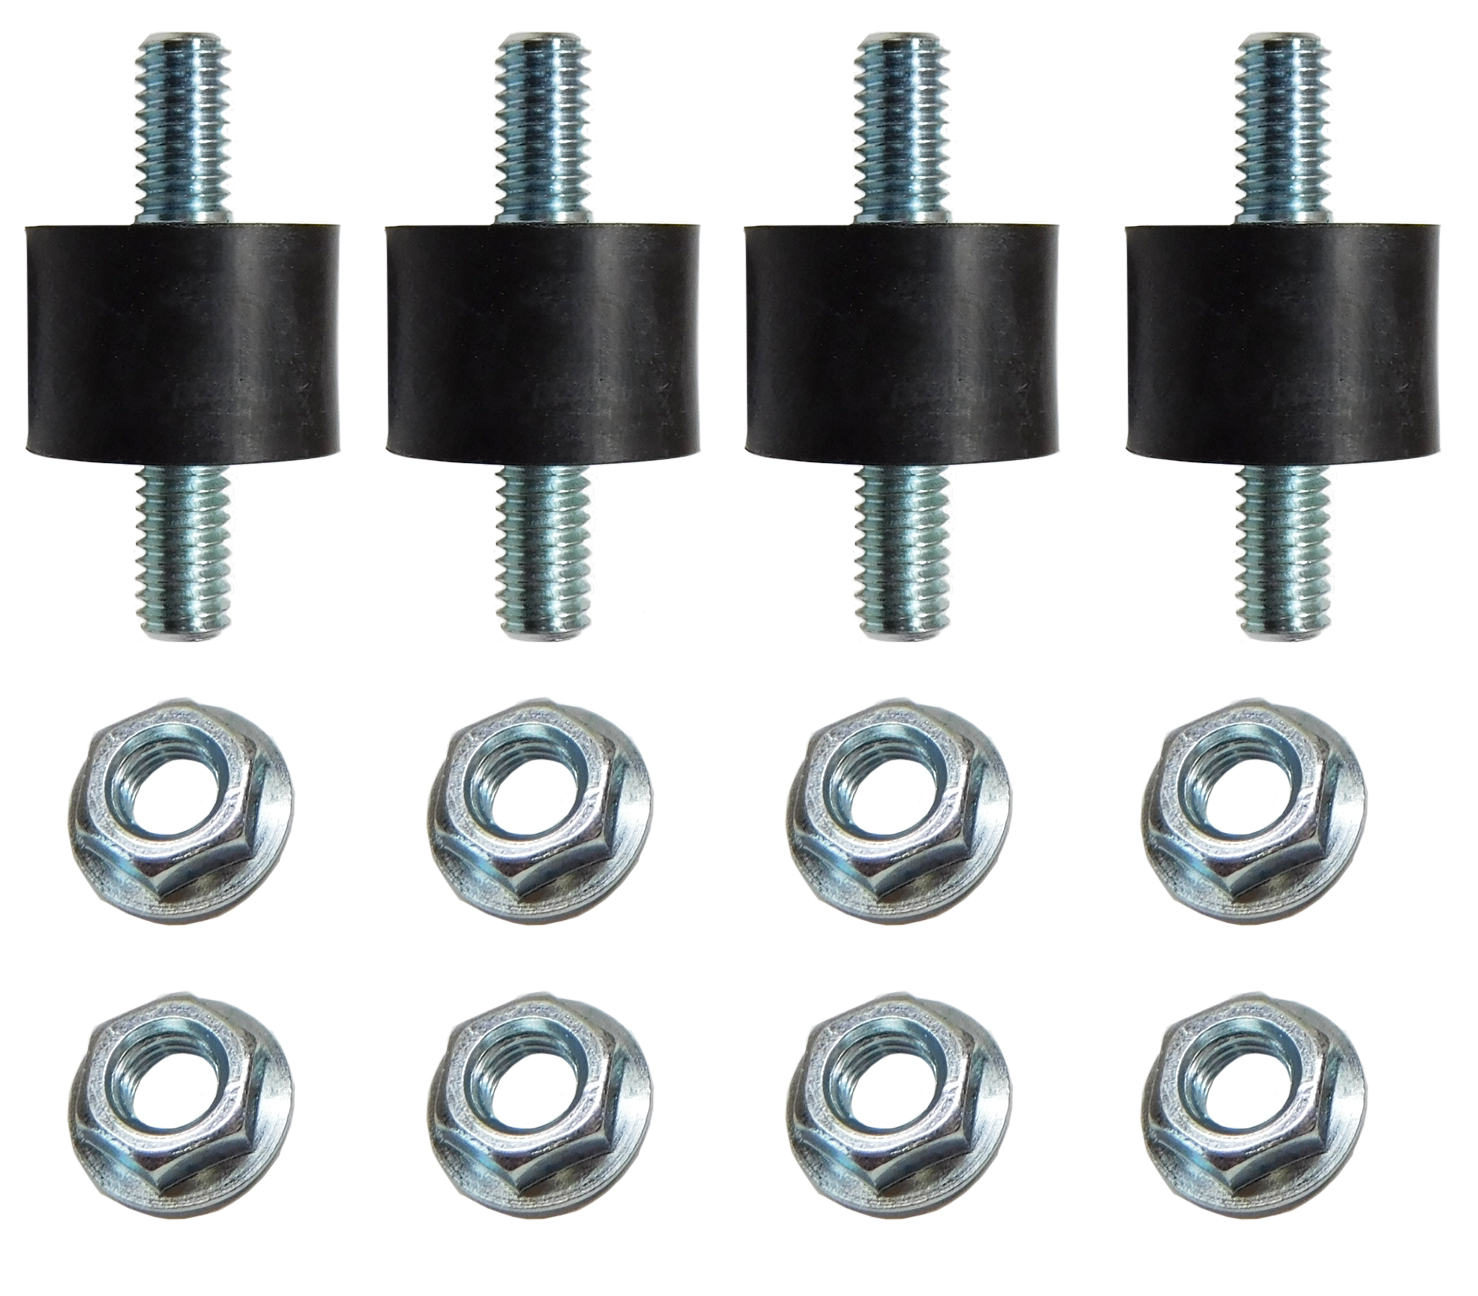 1977 Pontiac GTO/LeMans/Tempest AIR CONDITIONING MOUNTING STUD INSULATOR (THIS IS THE 3/4'' ROUND RUBBER INSULATOR WITH A 5/16'' STUD ON EACH END) - KIT (4 PIECE) | AC1234Z